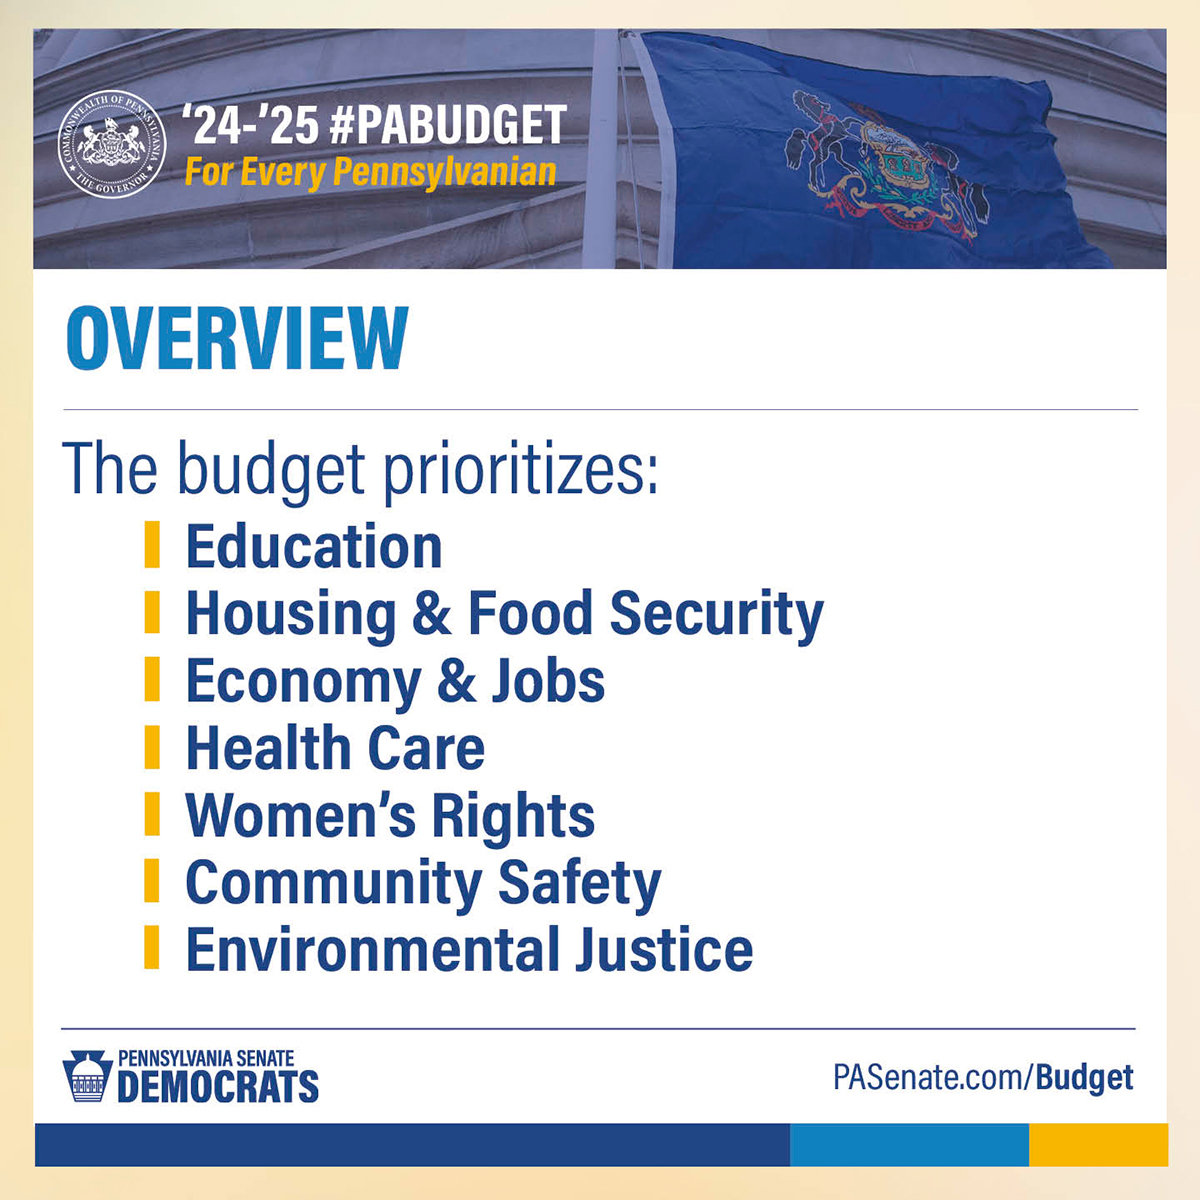 2024-25 PA Budget: Investing in Every Pennsylvanian - The budget prioritizes: Education, Housing & Food Security, Economy & Jobs, Health Care, Women's Rights, Community Safety, Environmental Justice